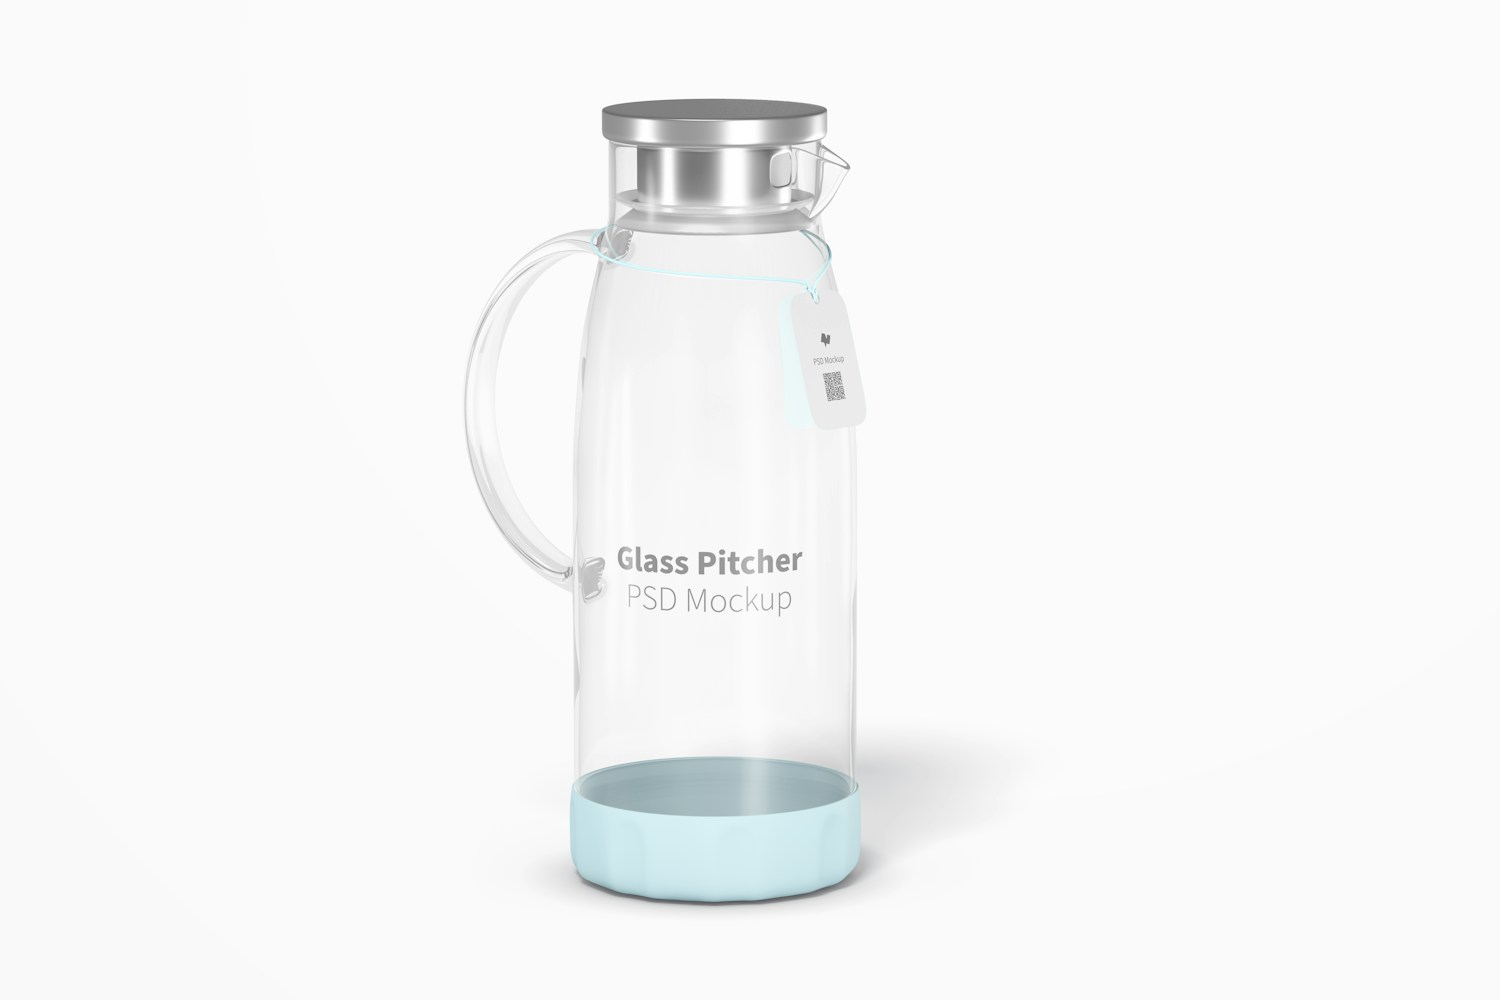 Glass Pitcher with Lid Mockup